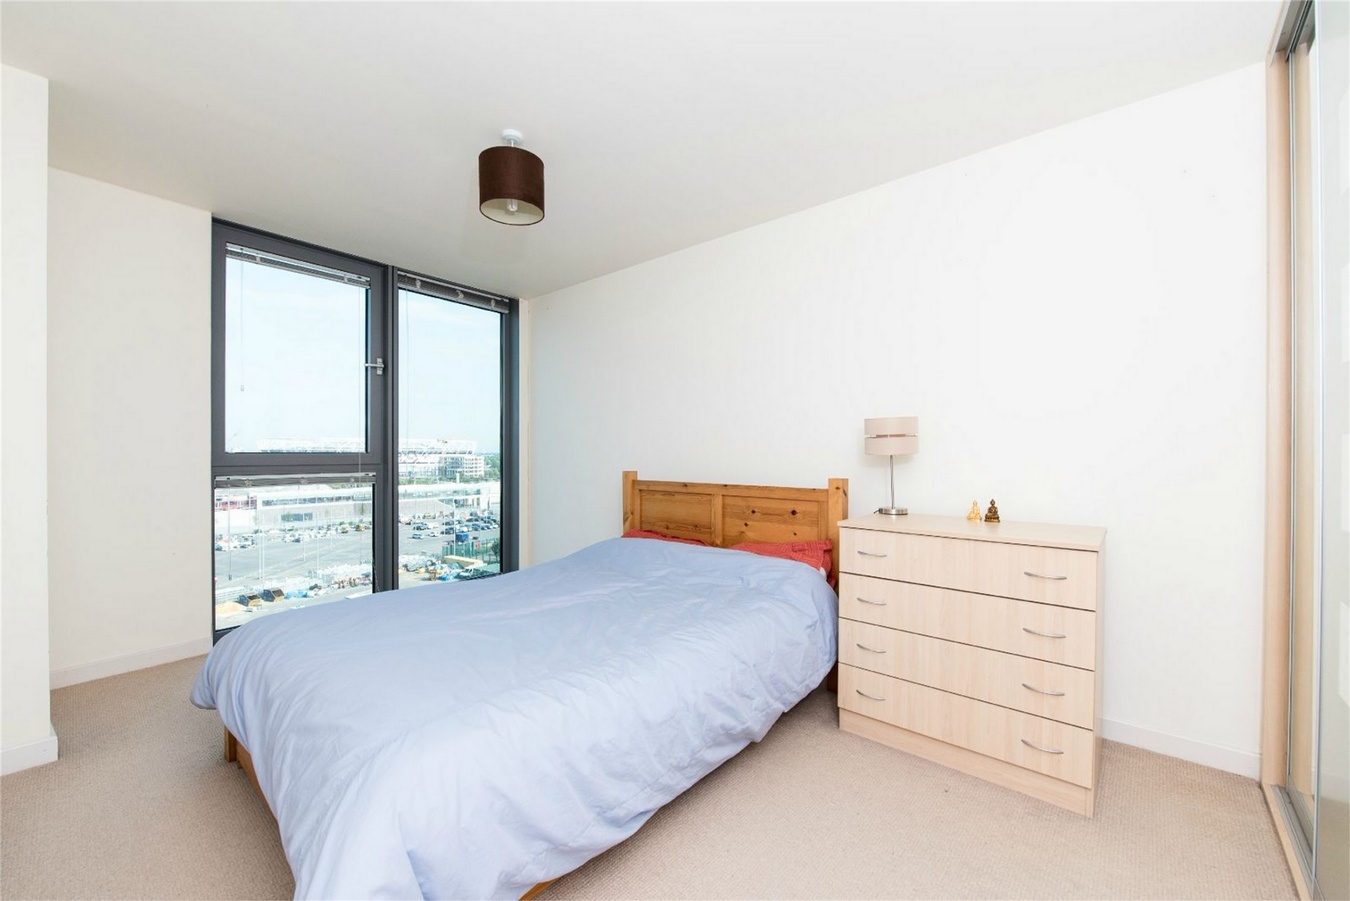 1 Bedroom Flat To Rent In Stratford High Street Stratford Bow